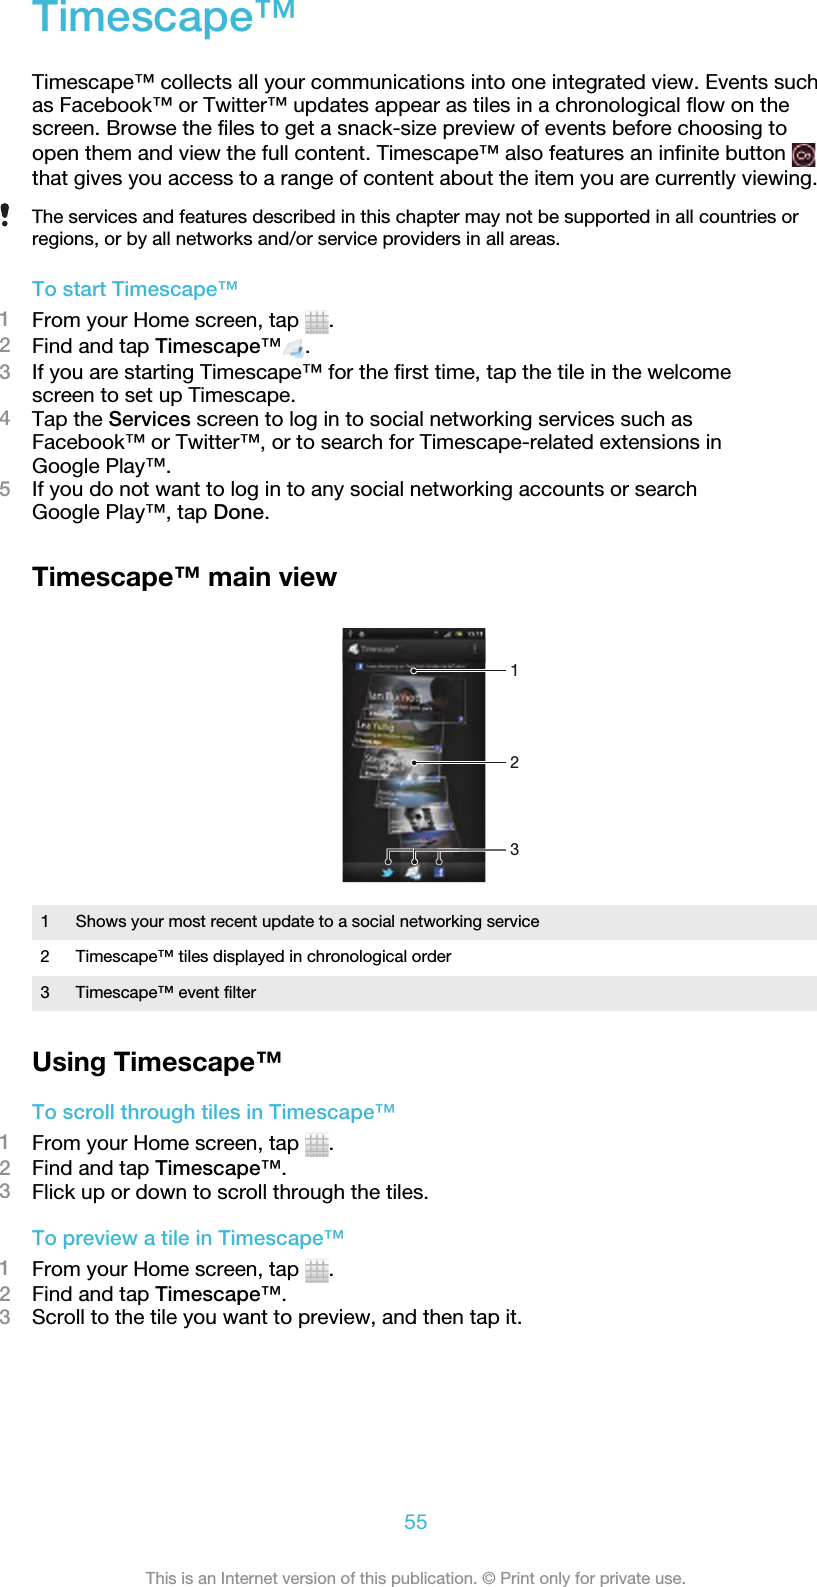 Timescape™Timescape™ collects all your communications into one integrated view. Events suchas Facebook™ or Twitter™ updates appear as tiles in a chronological flow on thescreen. Browse the files to get a snack-size preview of events before choosing toopen them and view the full content. Timescape™ also features an infinite button that gives you access to a range of content about the item you are currently viewing.The services and features described in this chapter may not be supported in all countries orregions, or by all networks and/or service providers in all areas.To start Timescape™1From your Home screen, tap  .2Find and tap Timescape™ .3If you are starting Timescape™ for the first time, tap the tile in the welcomescreen to set up Timescape.4Tap the Services screen to log in to social networking services such asFacebook™ or Twitter™, or to search for Timescape-related extensions inGoogle Play™.5If you do not want to log in to any social networking accounts or searchGoogle Play™, tap Done.Timescape™ main view2131Shows your most recent update to a social networking service2 Timescape™ tiles displayed in chronological order3 Timescape™ event filterUsing Timescape™To scroll through tiles in Timescape™1From your Home screen, tap  .2Find and tap Timescape™.3Flick up or down to scroll through the tiles.To preview a tile in Timescape™1From your Home screen, tap  .2Find and tap Timescape™.3Scroll to the tile you want to preview, and then tap it.55This is an Internet version of this publication. © Print only for private use.